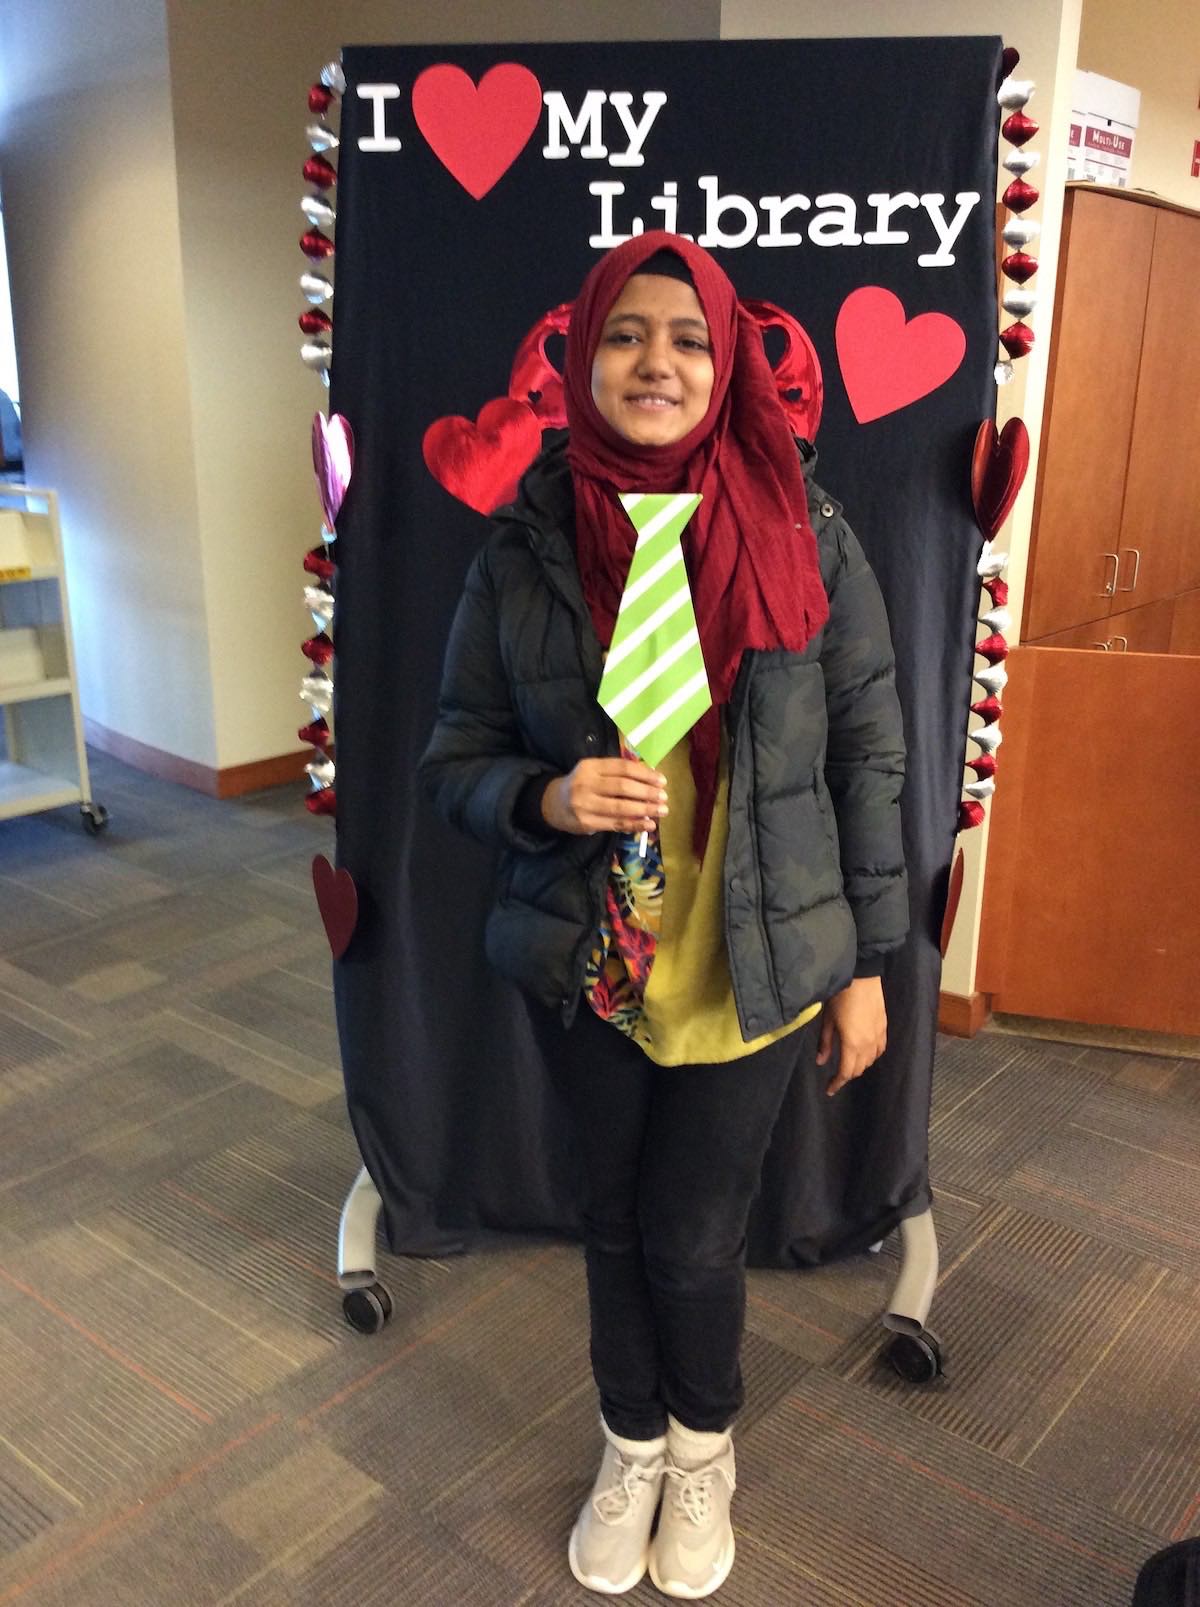 A student wearing a red hijab and puffy jacket poses in front of the I love my library backdrop holding up a prop necktie on a stick and smiling